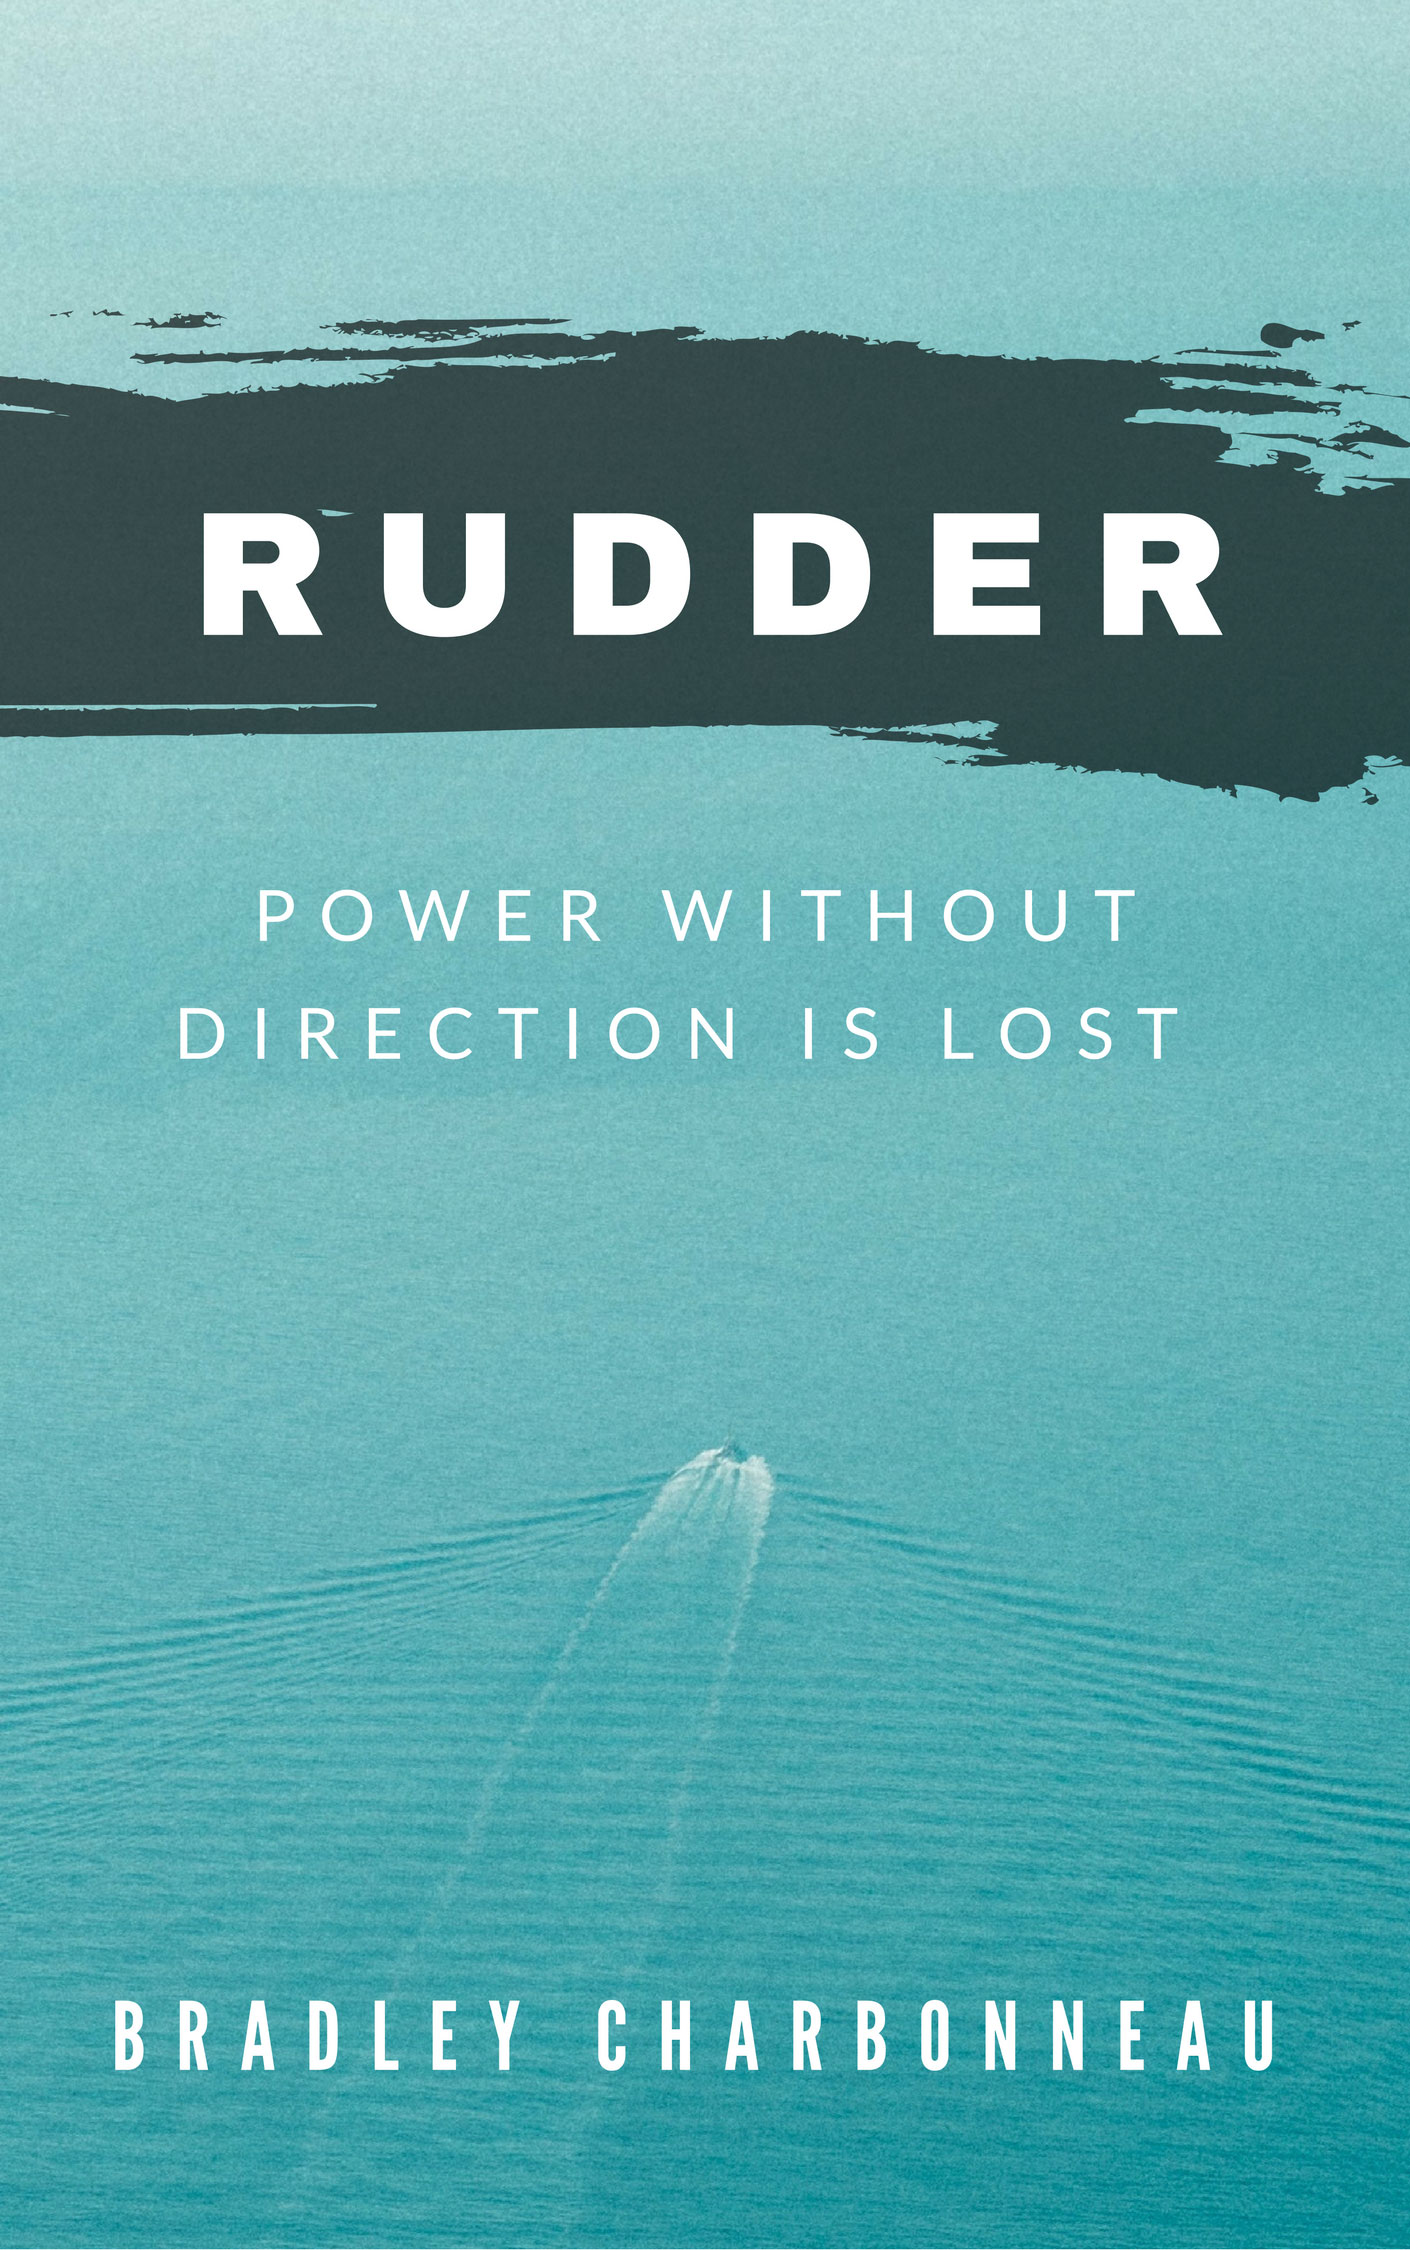 Rudder: Power without direction is lost.